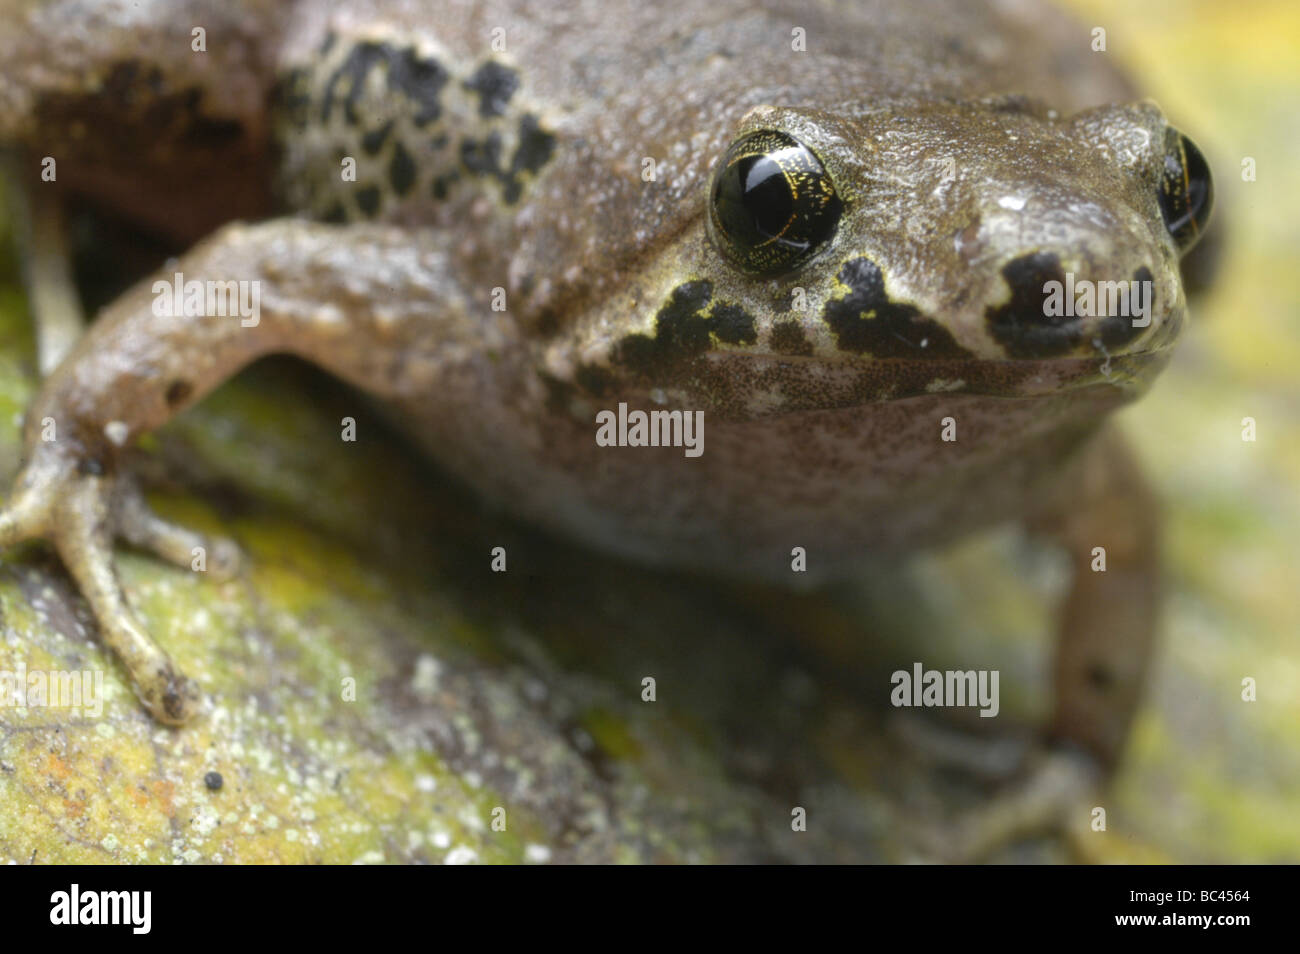 Bornean Narrow-mouthed Frog Microhyla borneensis Stock Photo